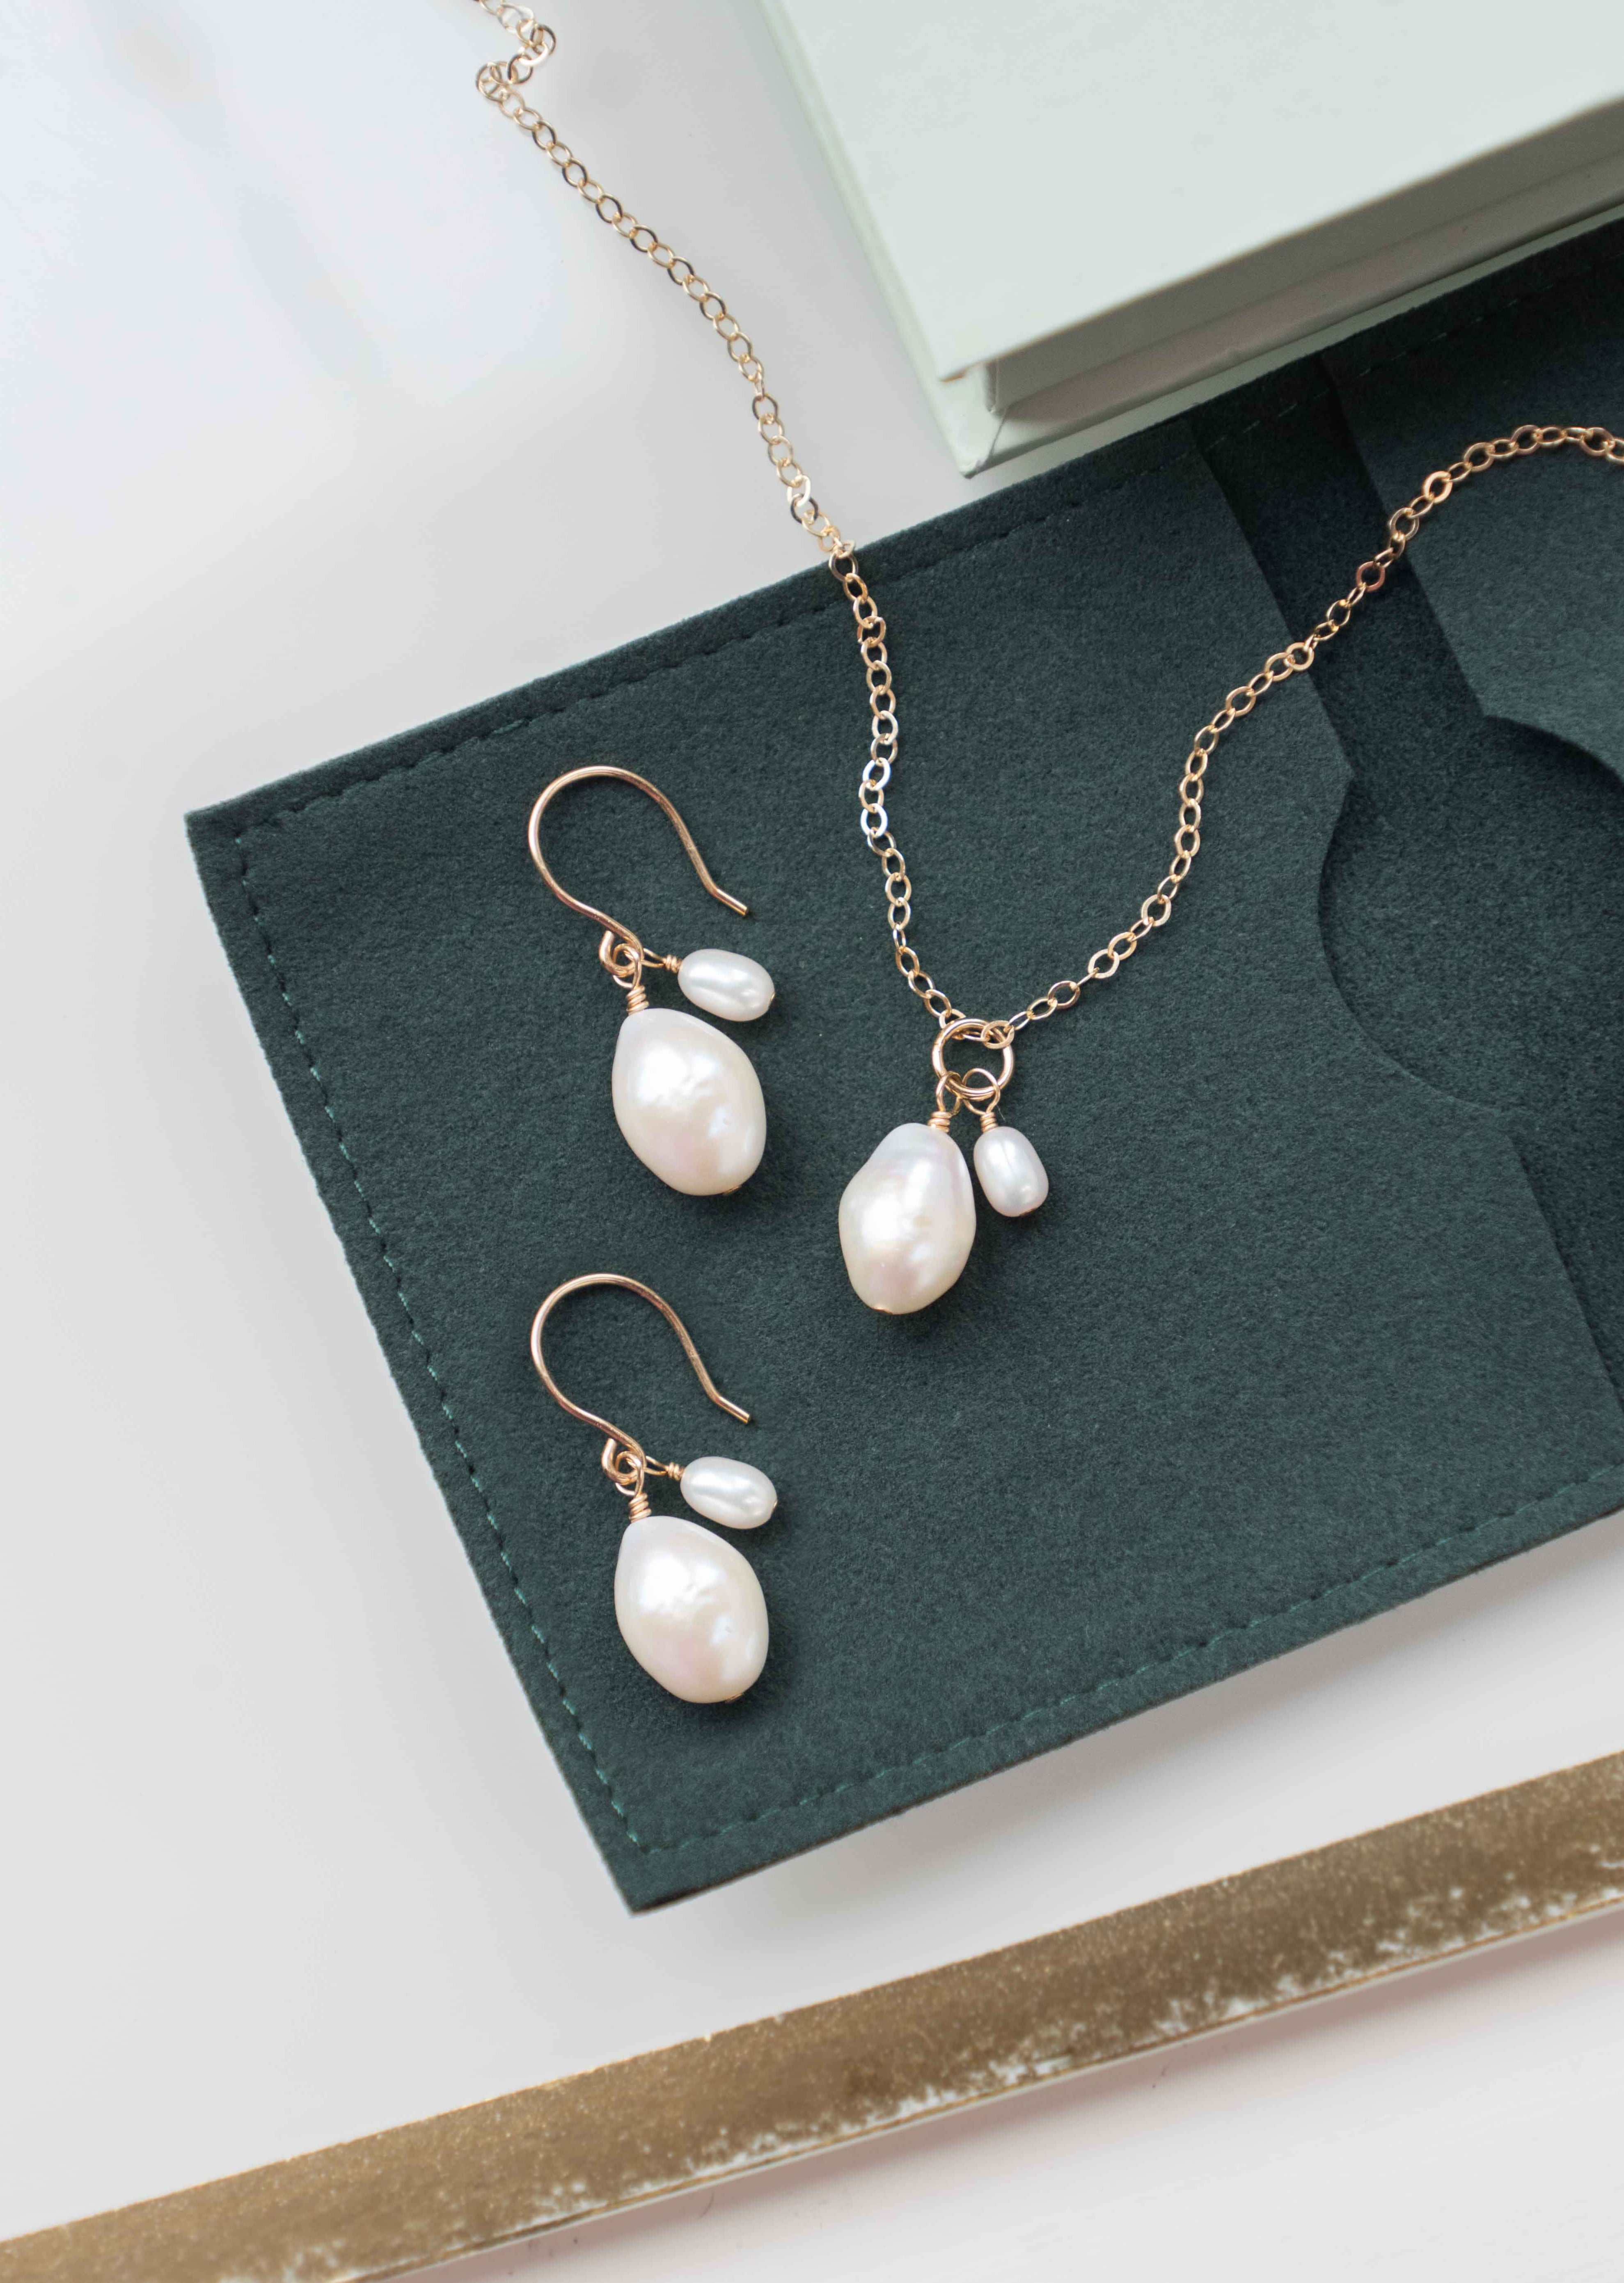 Mother Daughter Necklace Earring Set, Mother Daughter Gift Set, Mothers Day Gift set, best gift for mom, pearl necklace set, gift for new moms